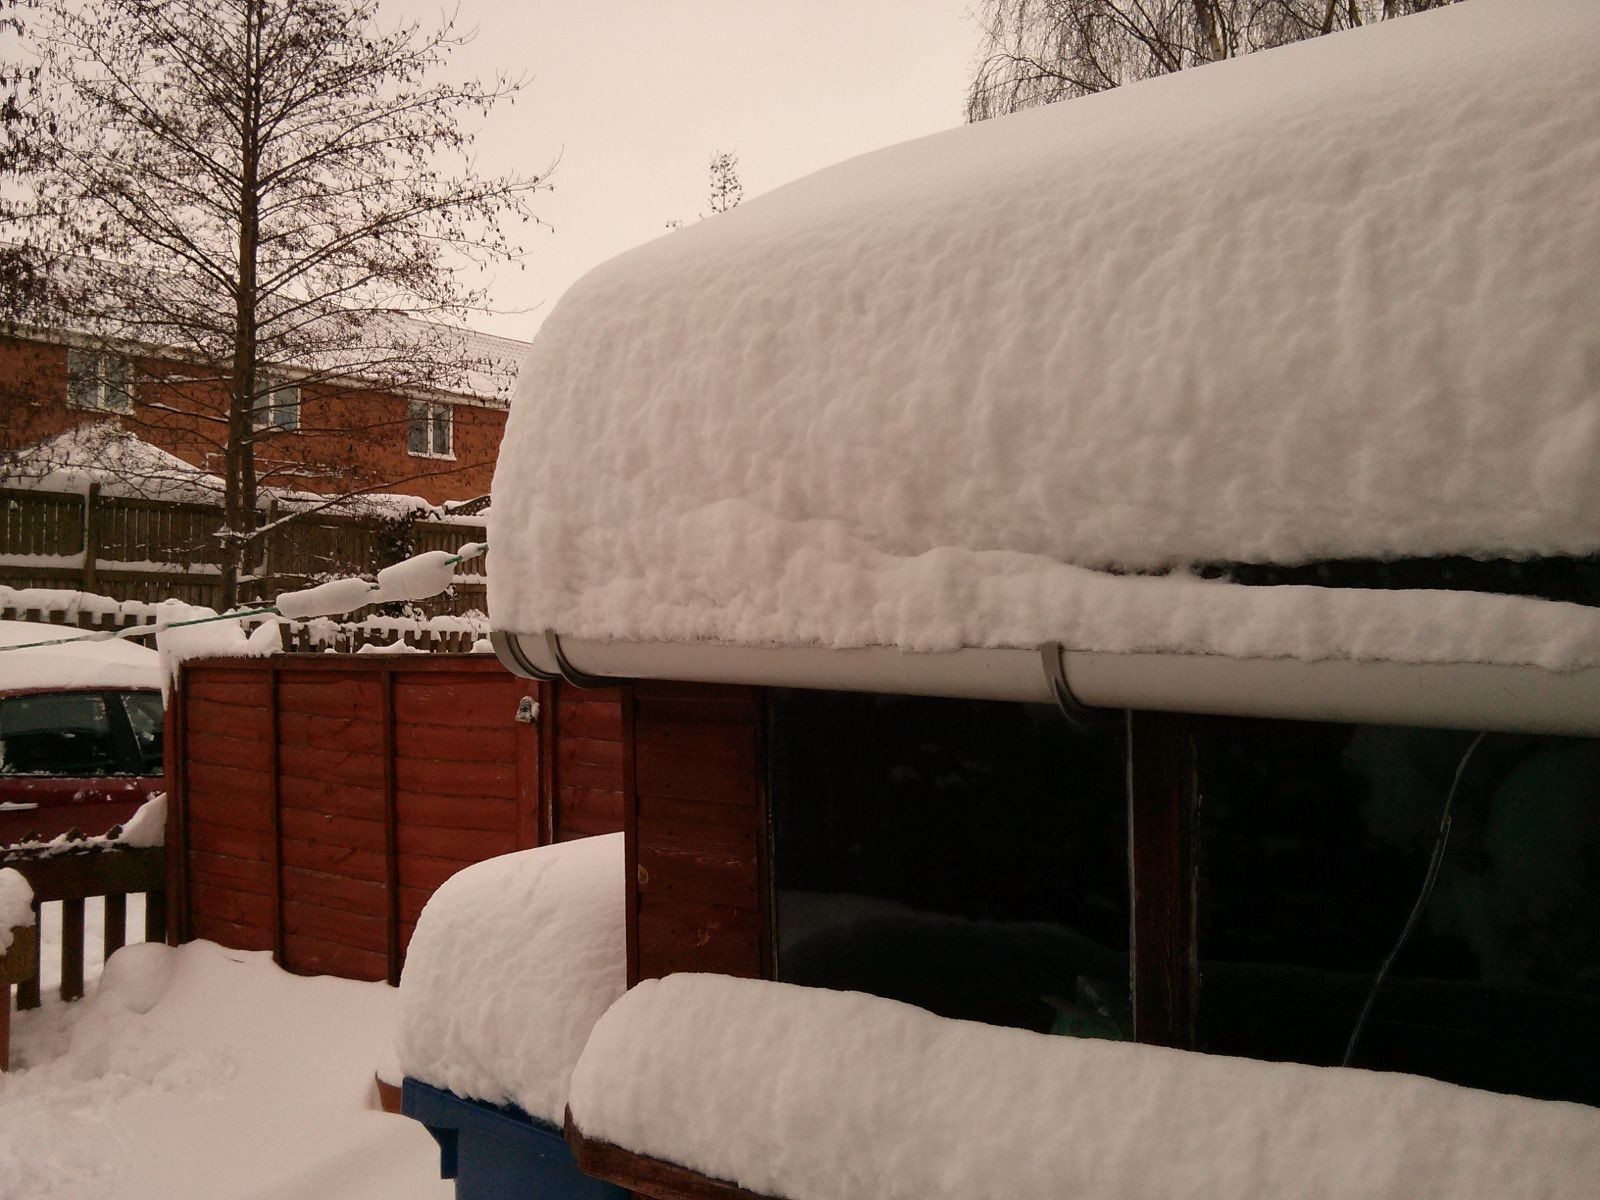 38cm On Shed Roof